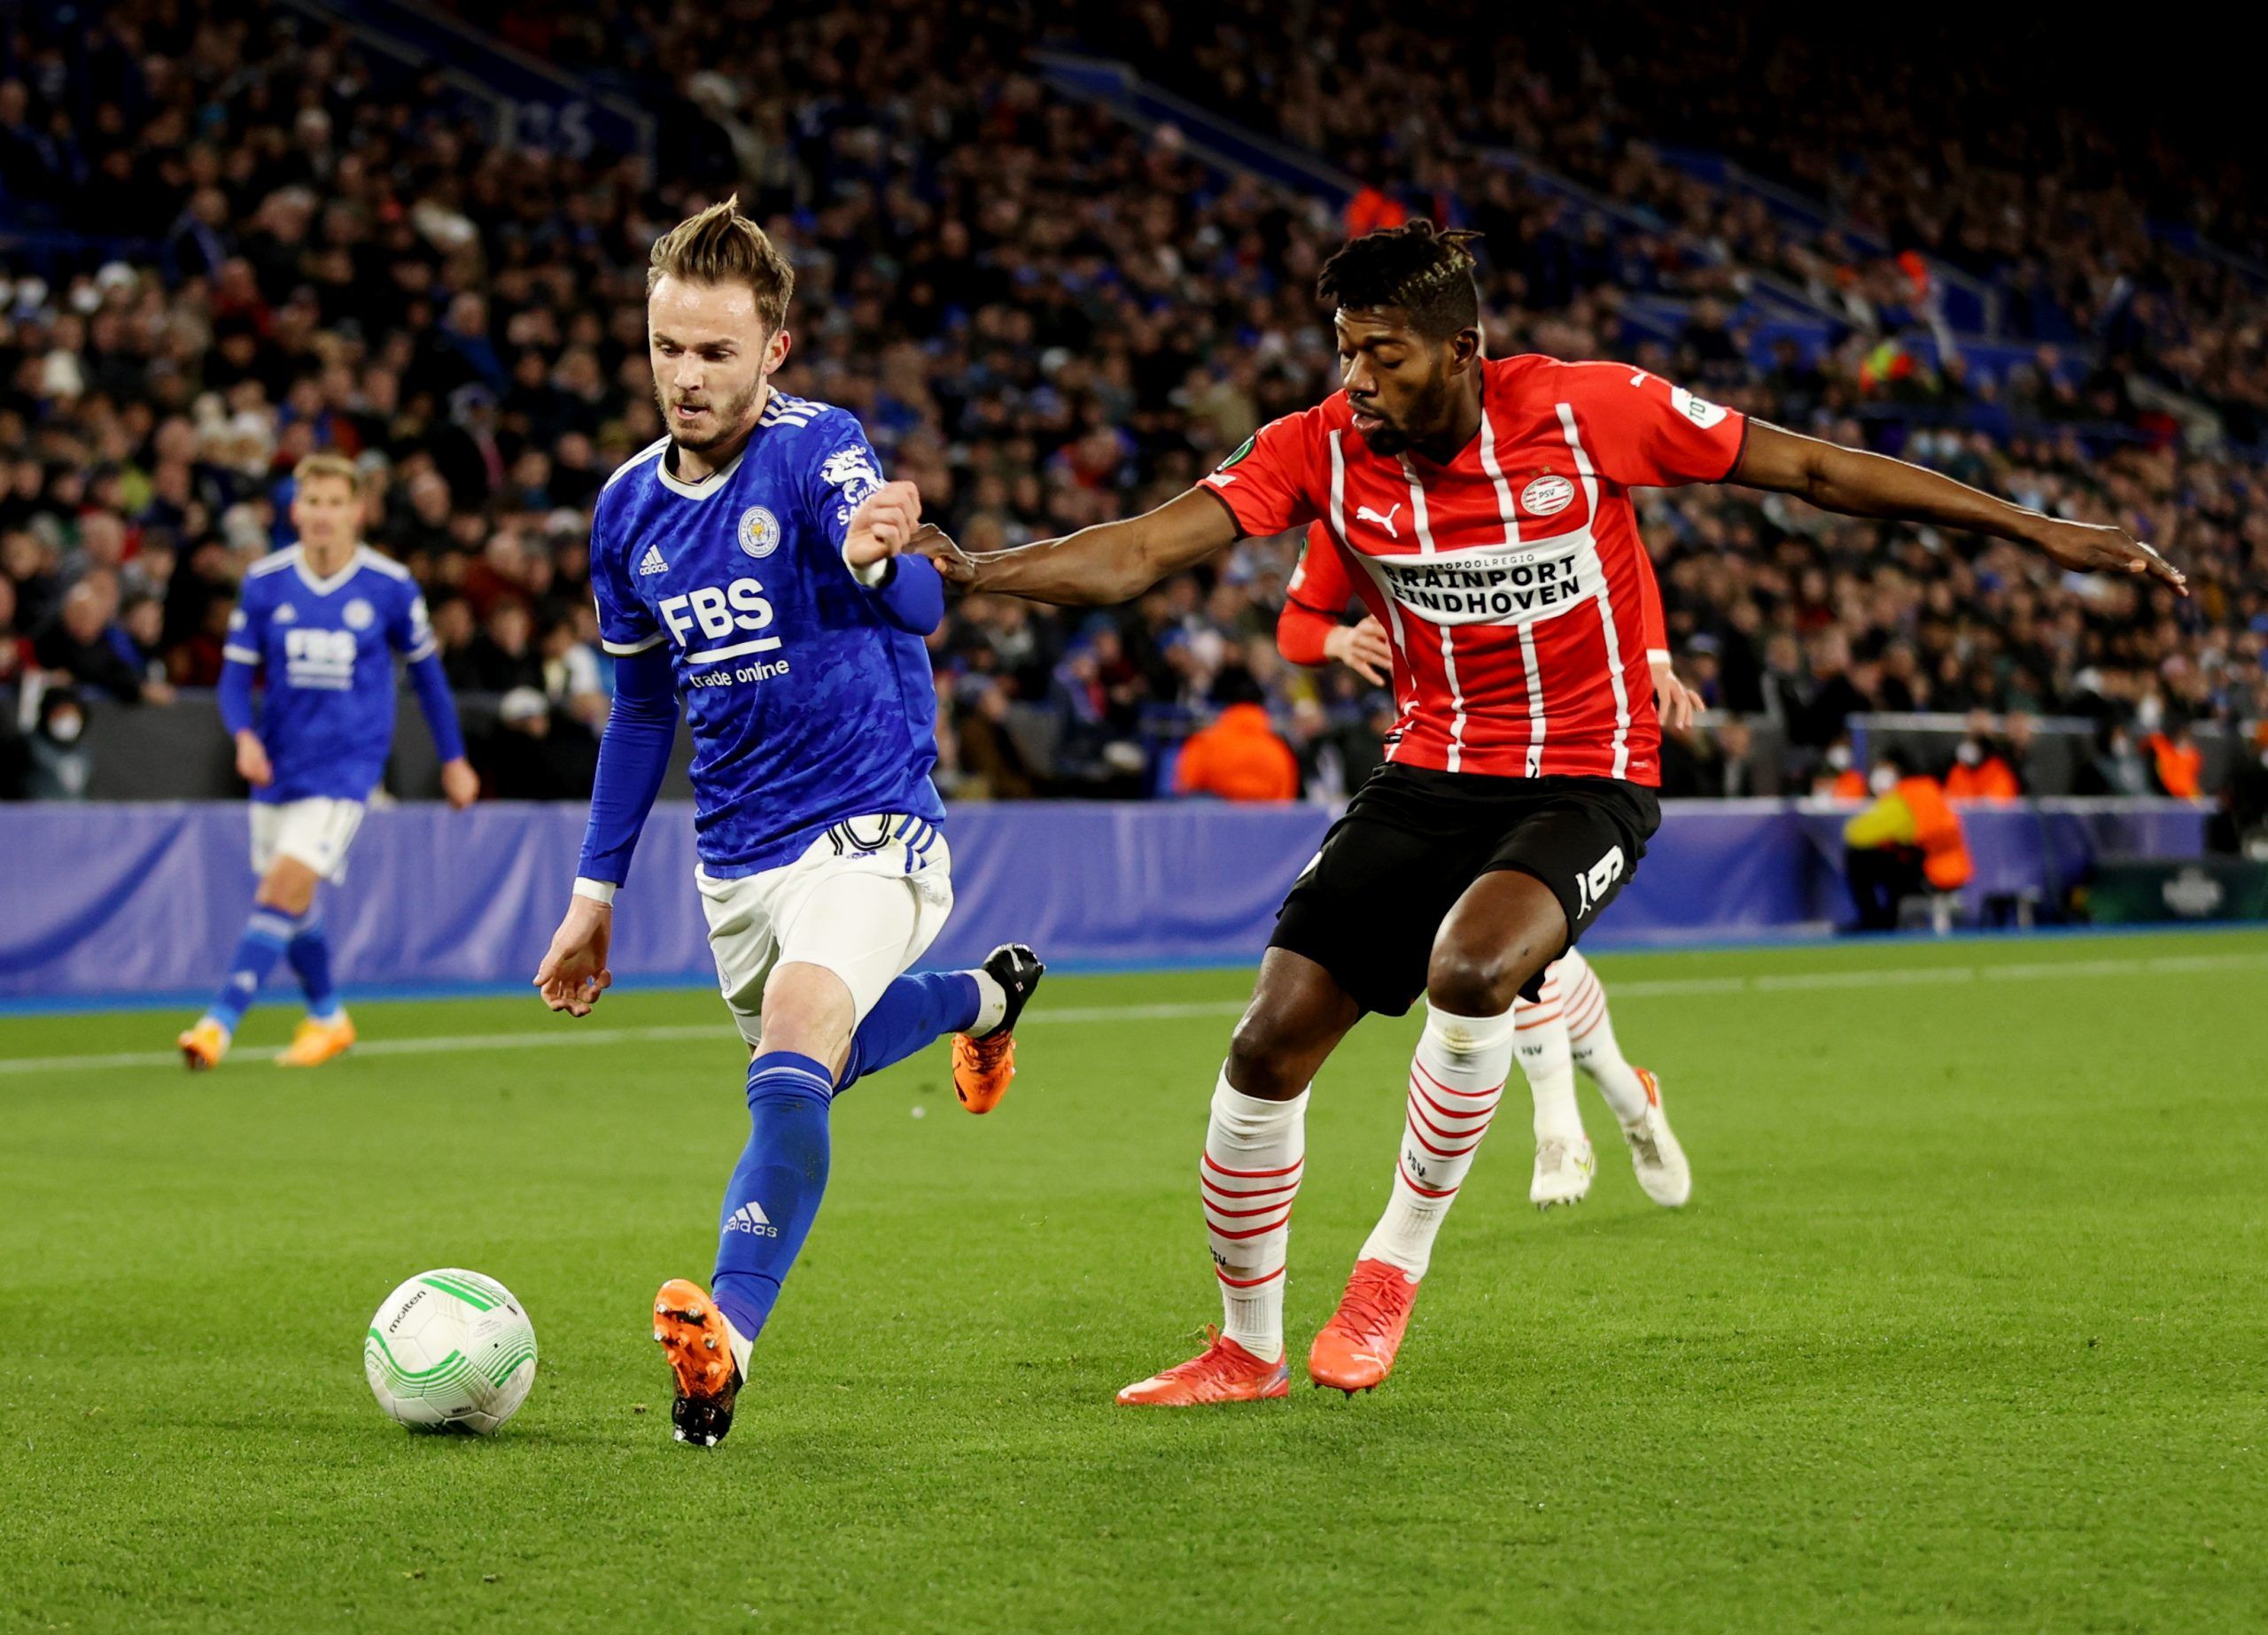 Soccer Football - Europa League - Quarter Final - First Leg - Leicester City v PSV Eindhoven - King Power Stadium, Leicester, Britain - April 7, 2022 Leicester City's James Maddison in action with PSV Eindhoven's Ibrahim Sangare Action Images via Reuters/Molly Darlington